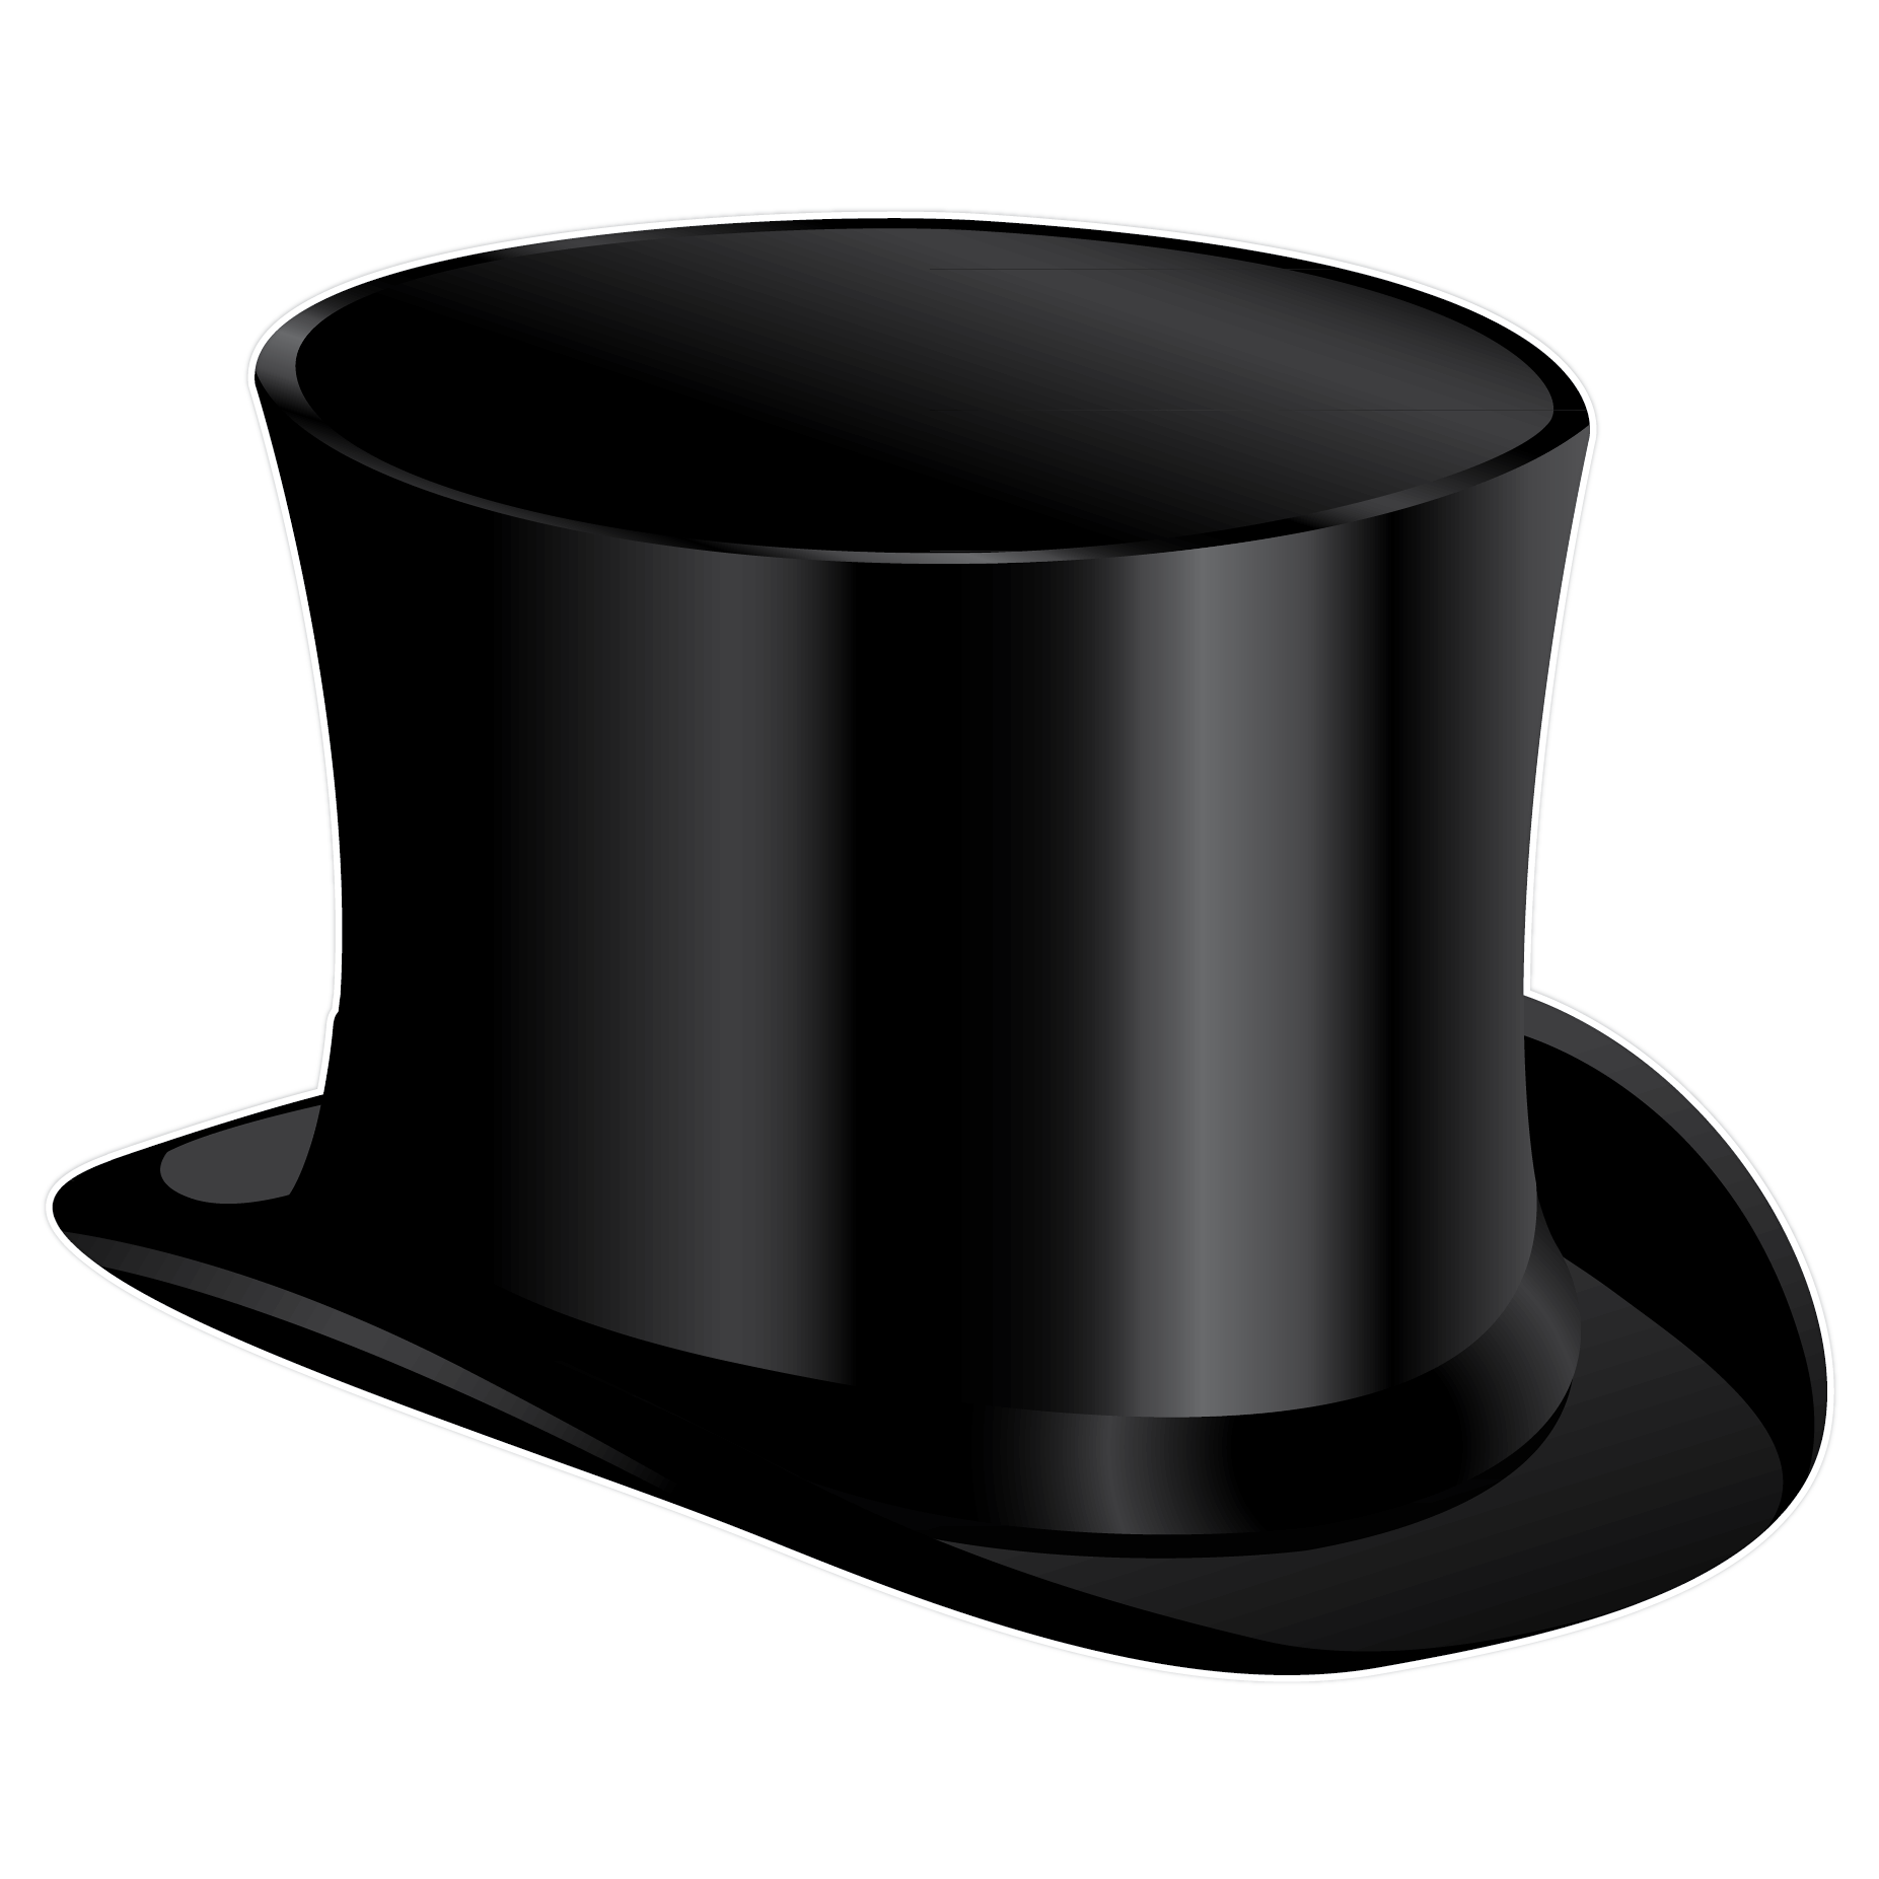 Hat Image Hd Photo Clipart